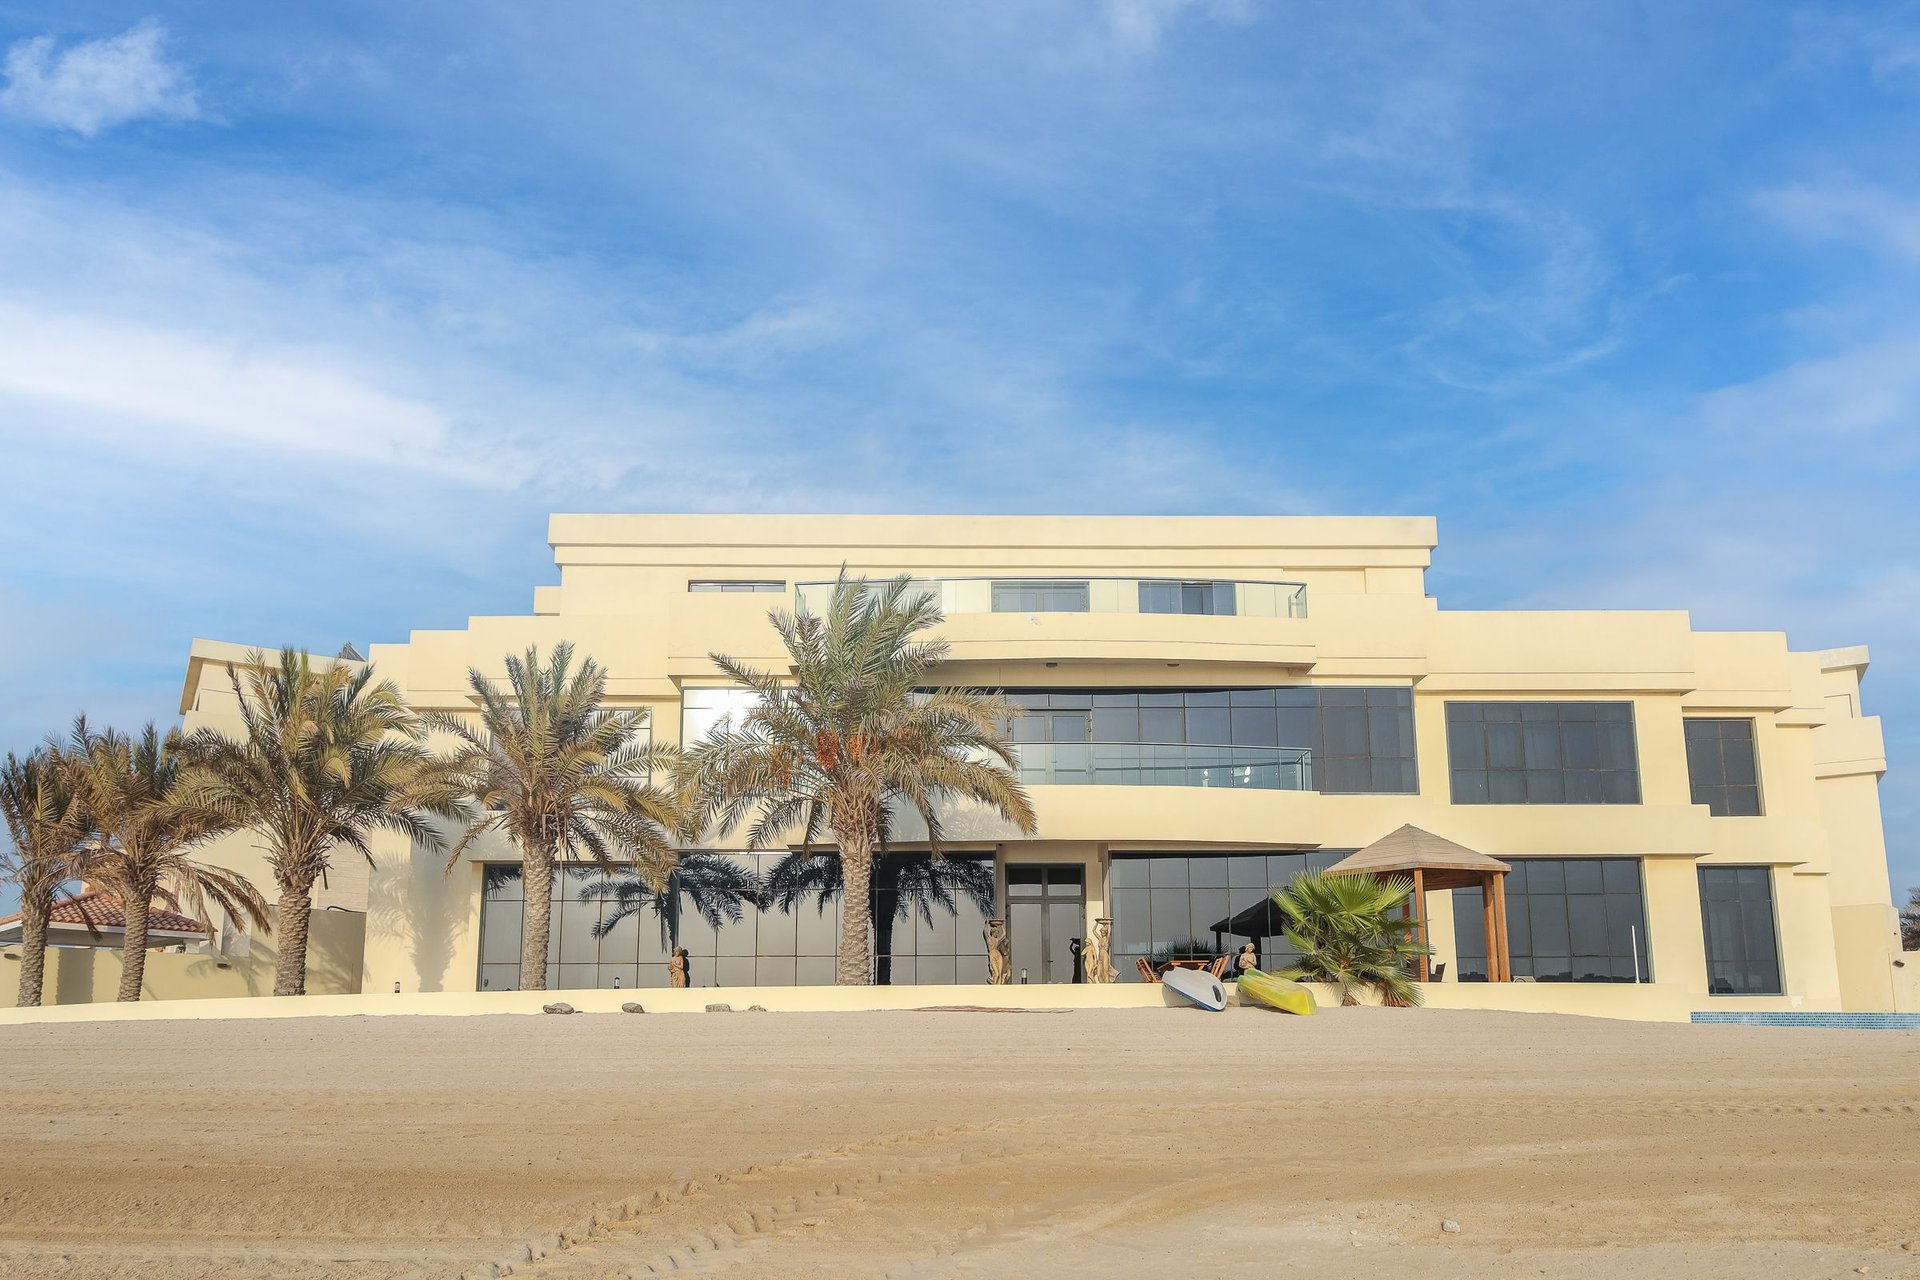 Ultra luxury, custom built beachfront villa for sale on exclusive Palm Jumeirah
front with designer features and breath-taking Atlantis views, picture 1